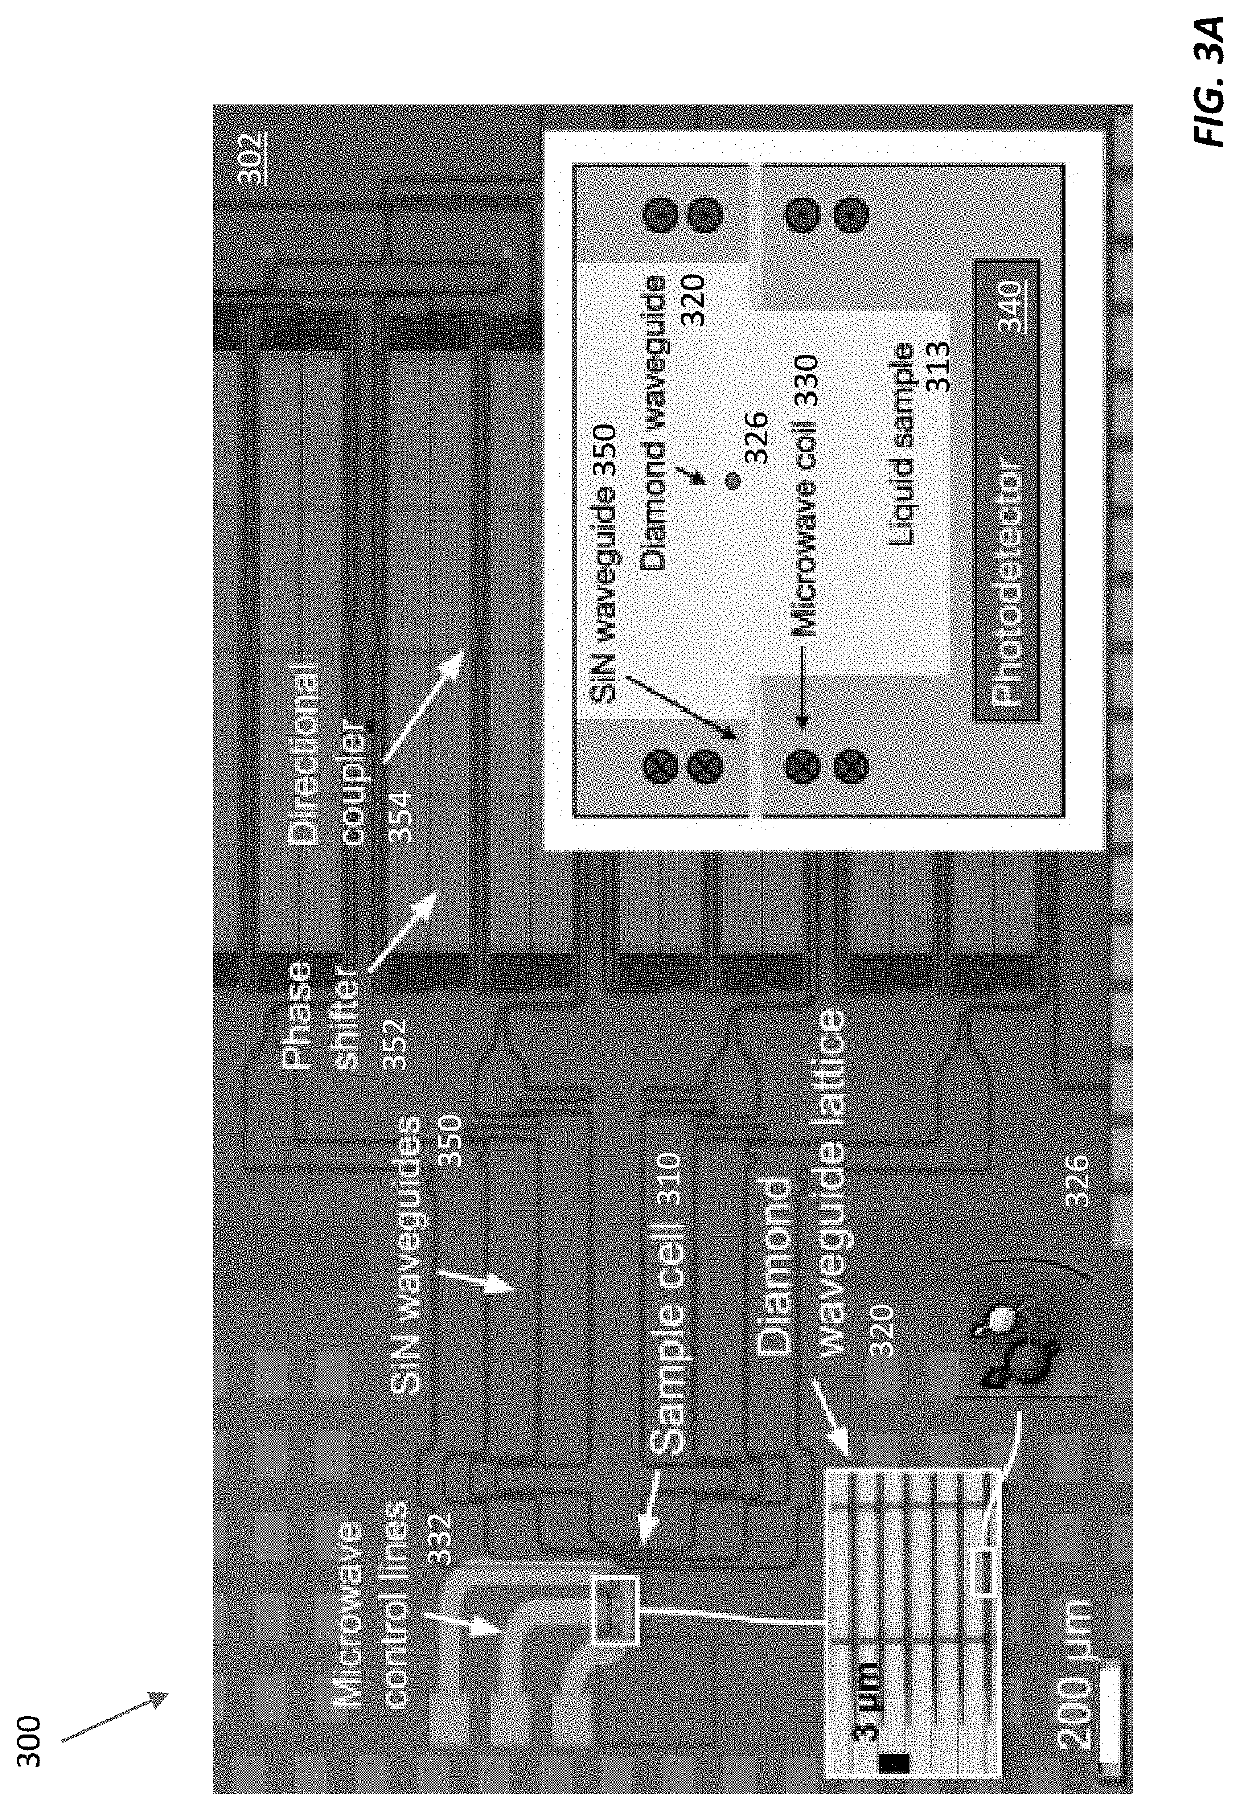 Cryogenic Integrated Circuits Architecture for Multiplexed Chemical-Shift NMR